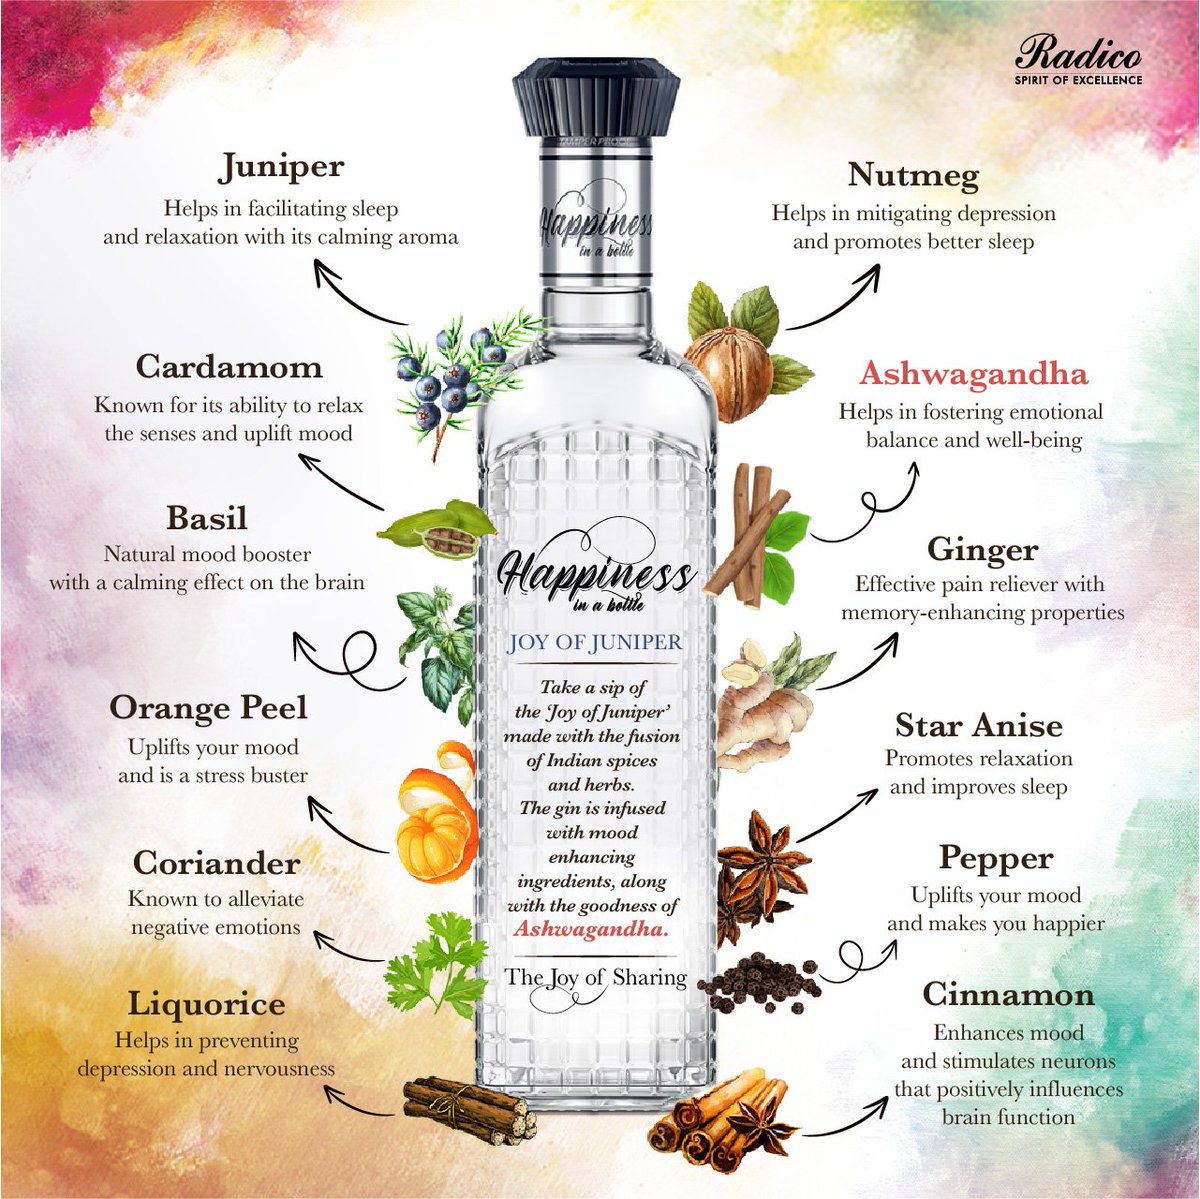 Discover Happiness in a Bottle - Joy of Juniper, a blend infused with Indian spices and herbs with the goodness of Ashwagandha, that elevate your spirits. #HappinessInABottle #HappilyCraftedGin #BlissfulBotanicals #MoodEnhancingIngredients #JoyOfJuniper #JoyOfSharing